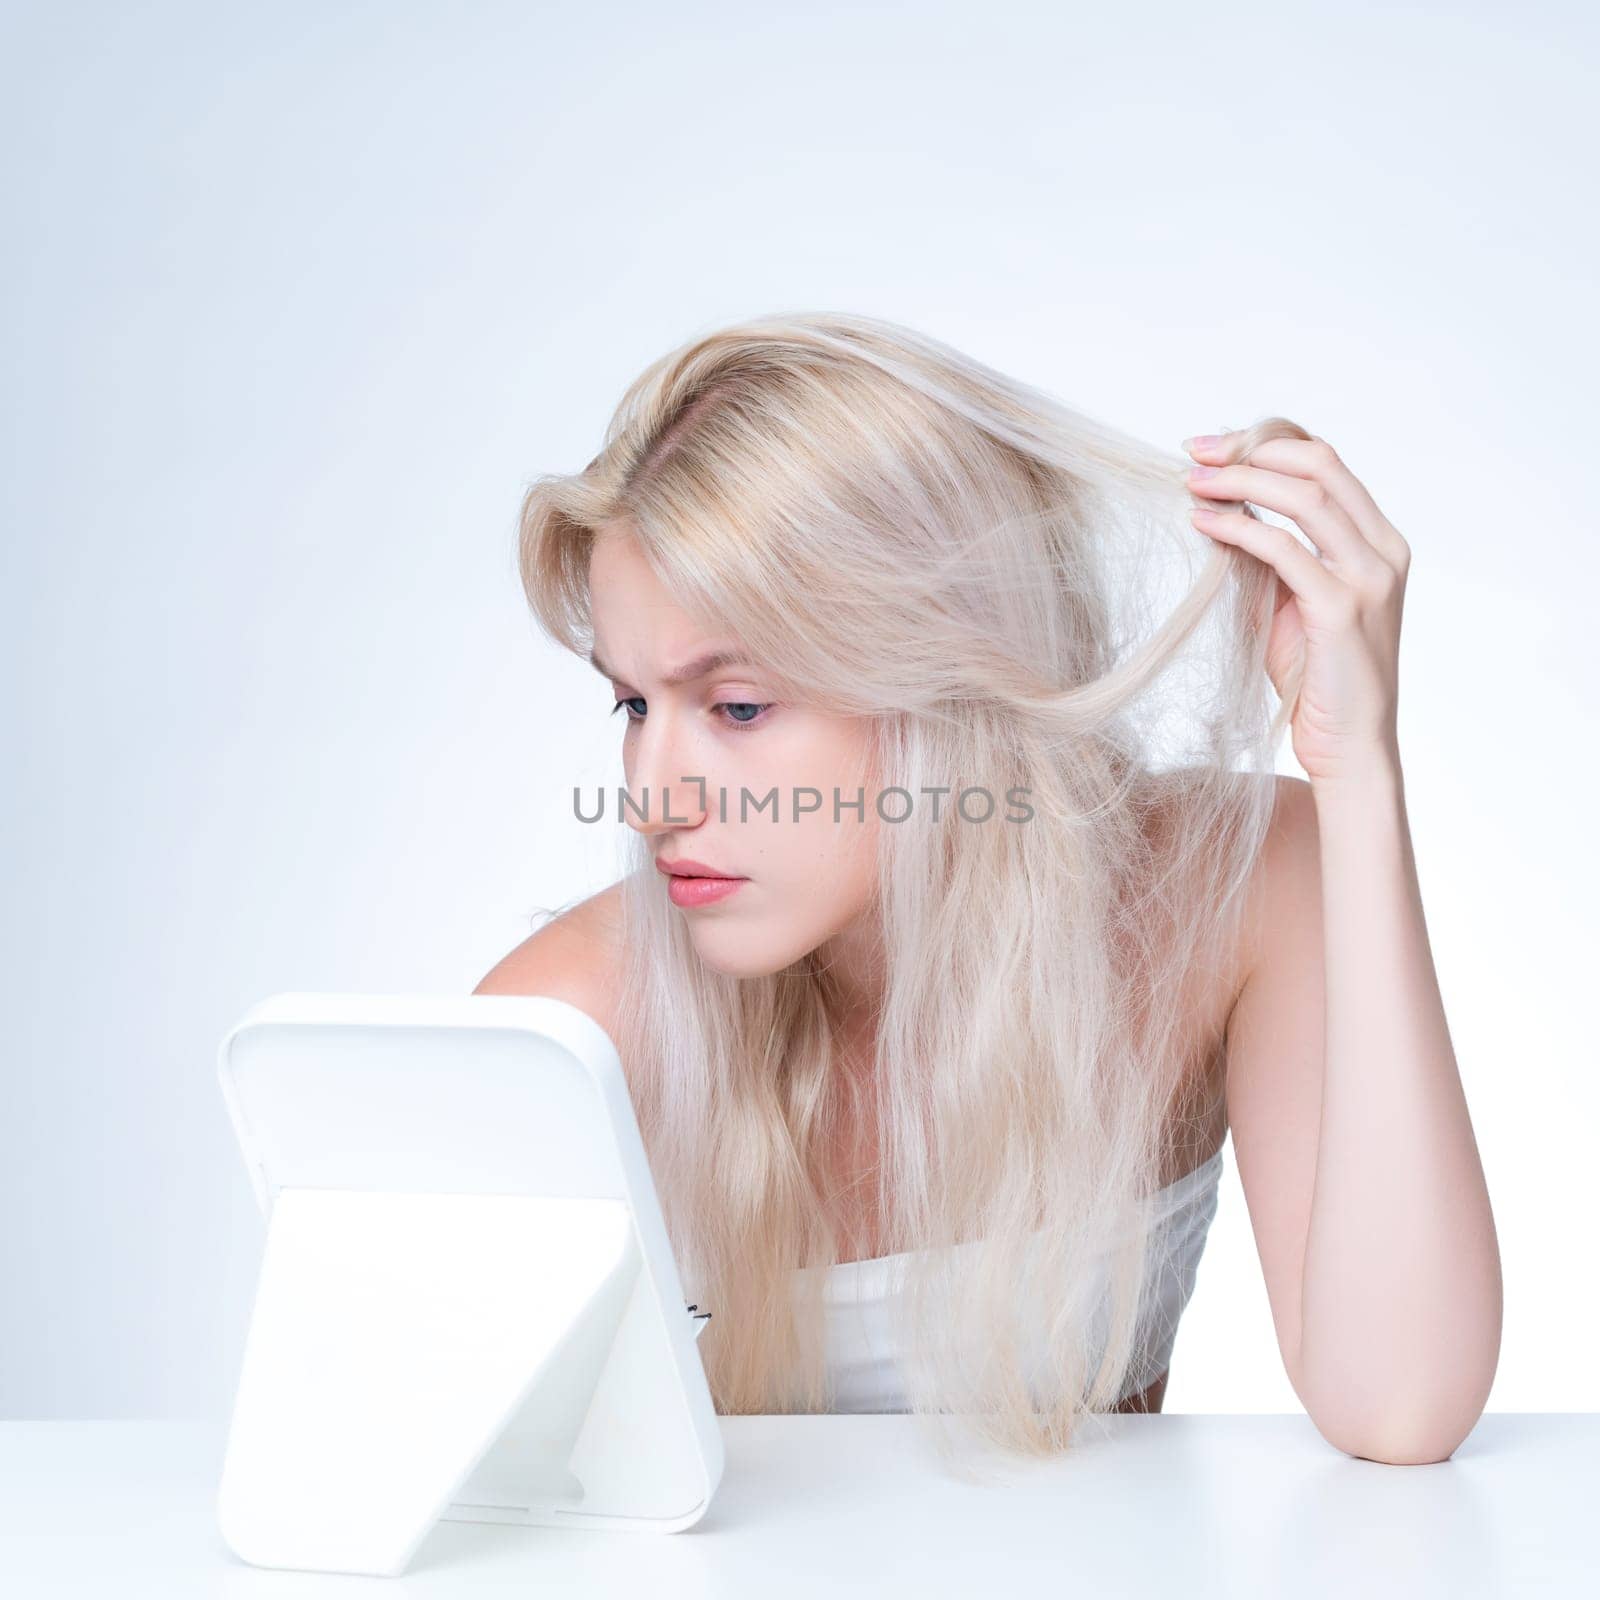 Personable beauty fresh clean skin woman having dry hair problem. Frustrated facial expression concept of damaged hair loss for shampoo ads in copyspace isolated background.